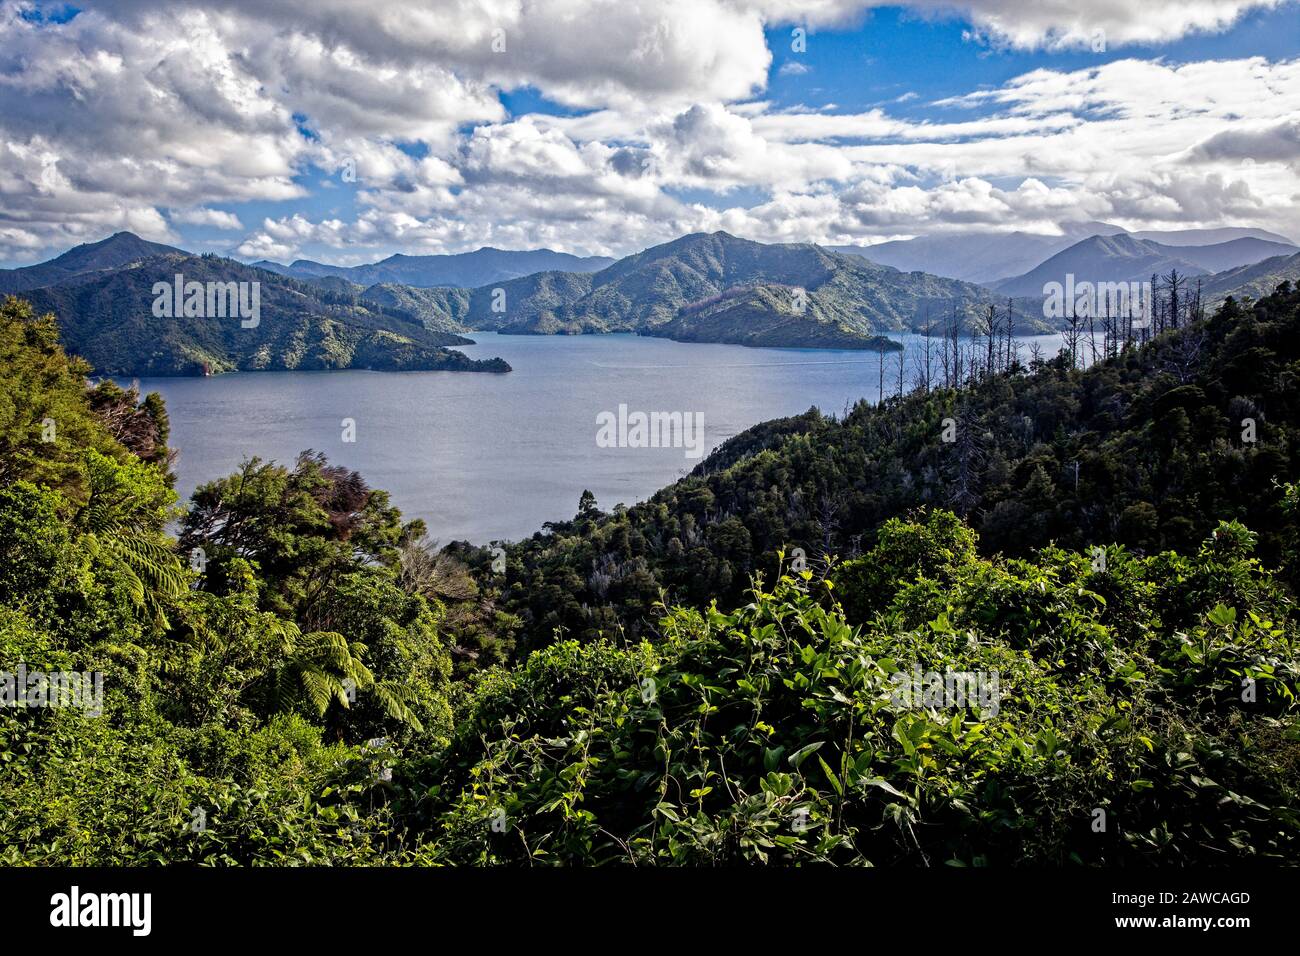 The Queen Charlotte Sound in Marlborough Sounds Maritime Park, South Island, New Zealand. Stock Photo